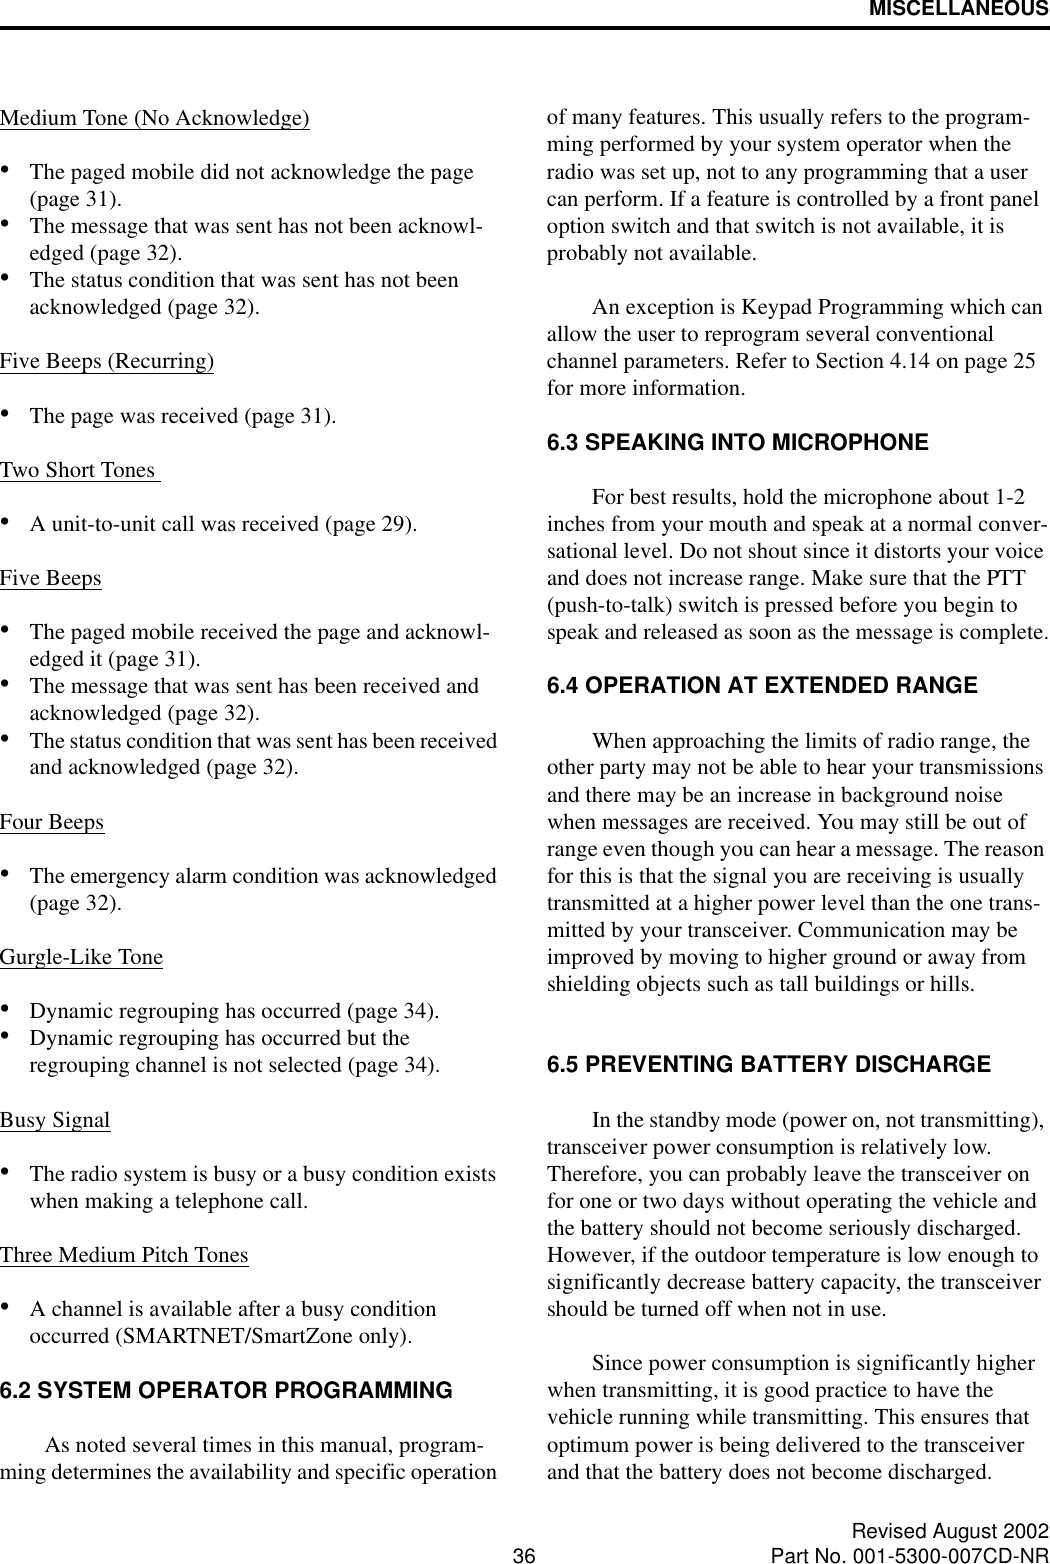 MISCELLANEOUS36 Revised August 2002Part No. 001-5300-007CD-NRMedium Tone (No Acknowledge)•The paged mobile did not acknowledge the page (page 31).•The message that was sent has not been acknowl-edged (page 32).•The status condition that was sent has not been acknowledged (page 32).Five Beeps (Recurring)•The page was received (page 31).Two Short Tones •A unit-to-unit call was received (page 29).Five Beeps•The paged mobile received the page and acknowl-edged it (page 31).•The message that was sent has been received and acknowledged (page 32).•The status condition that was sent has been received and acknowledged (page 32).Four Beeps•The emergency alarm condition was acknowledged (page 32).Gurgle-Like Tone•Dynamic regrouping has occurred (page 34).•Dynamic regrouping has occurred but the regrouping channel is not selected (page 34).Busy Signal•The radio system is busy or a busy condition exists when making a telephone call.Three Medium Pitch Tones•A channel is available after a busy condition occurred (SMARTNET/SmartZone only).6.2 SYSTEM OPERATOR PROGRAMMINGAs noted several times in this manual, program-ming determines the availability and specific operation of many features. This usually refers to the program-ming performed by your system operator when the radio was set up, not to any programming that a user can perform. If a feature is controlled by a front panel option switch and that switch is not available, it is probably not available. An exception is Keypad Programming which can allow the user to reprogram several conventional channel parameters. Refer to Section 4.14 on page 25 for more information.6.3 SPEAKING INTO MICROPHONEFor best results, hold the microphone about 1-2 inches from your mouth and speak at a normal conver-sational level. Do not shout since it distorts your voice and does not increase range. Make sure that the PTT (push-to-talk) switch is pressed before you begin to speak and released as soon as the message is complete.6.4 OPERATION AT EXTENDED RANGEWhen approaching the limits of radio range, the other party may not be able to hear your transmissions and there may be an increase in background noise when messages are received. You may still be out of range even though you can hear a message. The reason for this is that the signal you are receiving is usually transmitted at a higher power level than the one trans-mitted by your transceiver. Communication may be improved by moving to higher ground or away from shielding objects such as tall buildings or hills.6.5 PREVENTING BATTERY DISCHARGEIn the standby mode (power on, not transmitting), transceiver power consumption is relatively low. Therefore, you can probably leave the transceiver on for one or two days without operating the vehicle and the battery should not become seriously discharged. However, if the outdoor temperature is low enough to significantly decrease battery capacity, the transceiver should be turned off when not in use. Since power consumption is significantly higher when transmitting, it is good practice to have the vehicle running while transmitting. This ensures that optimum power is being delivered to the transceiver and that the battery does not become discharged. 